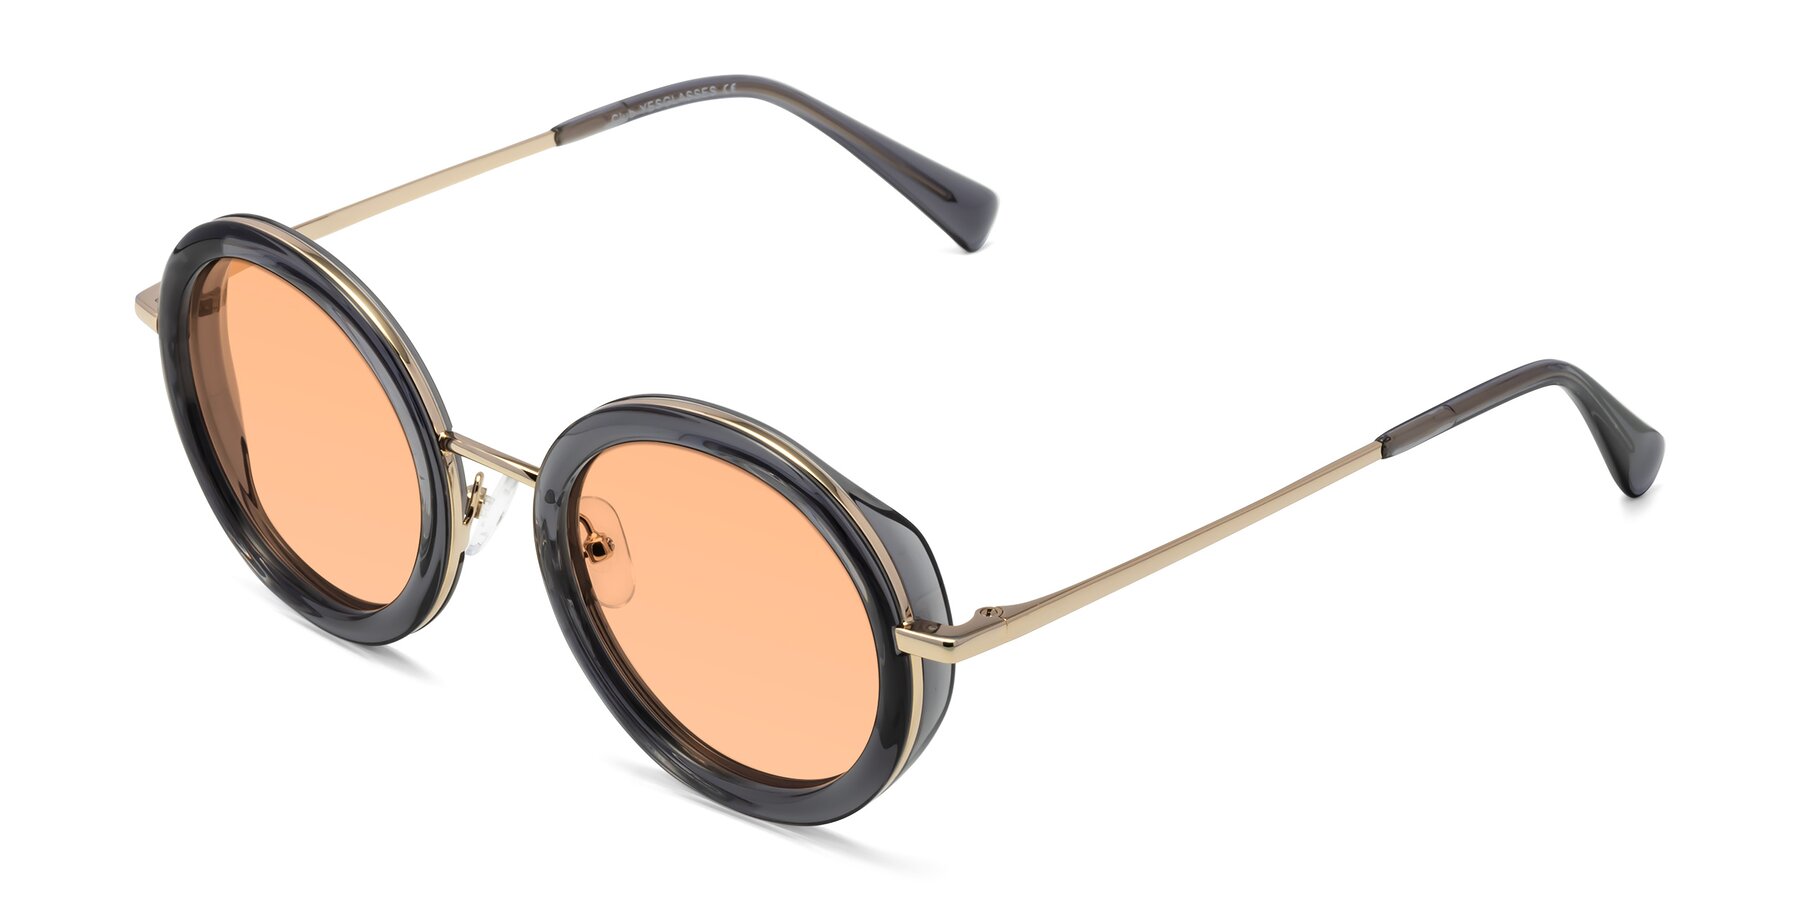 Angle of Club in Gray-Gold with Light Orange Tinted Lenses